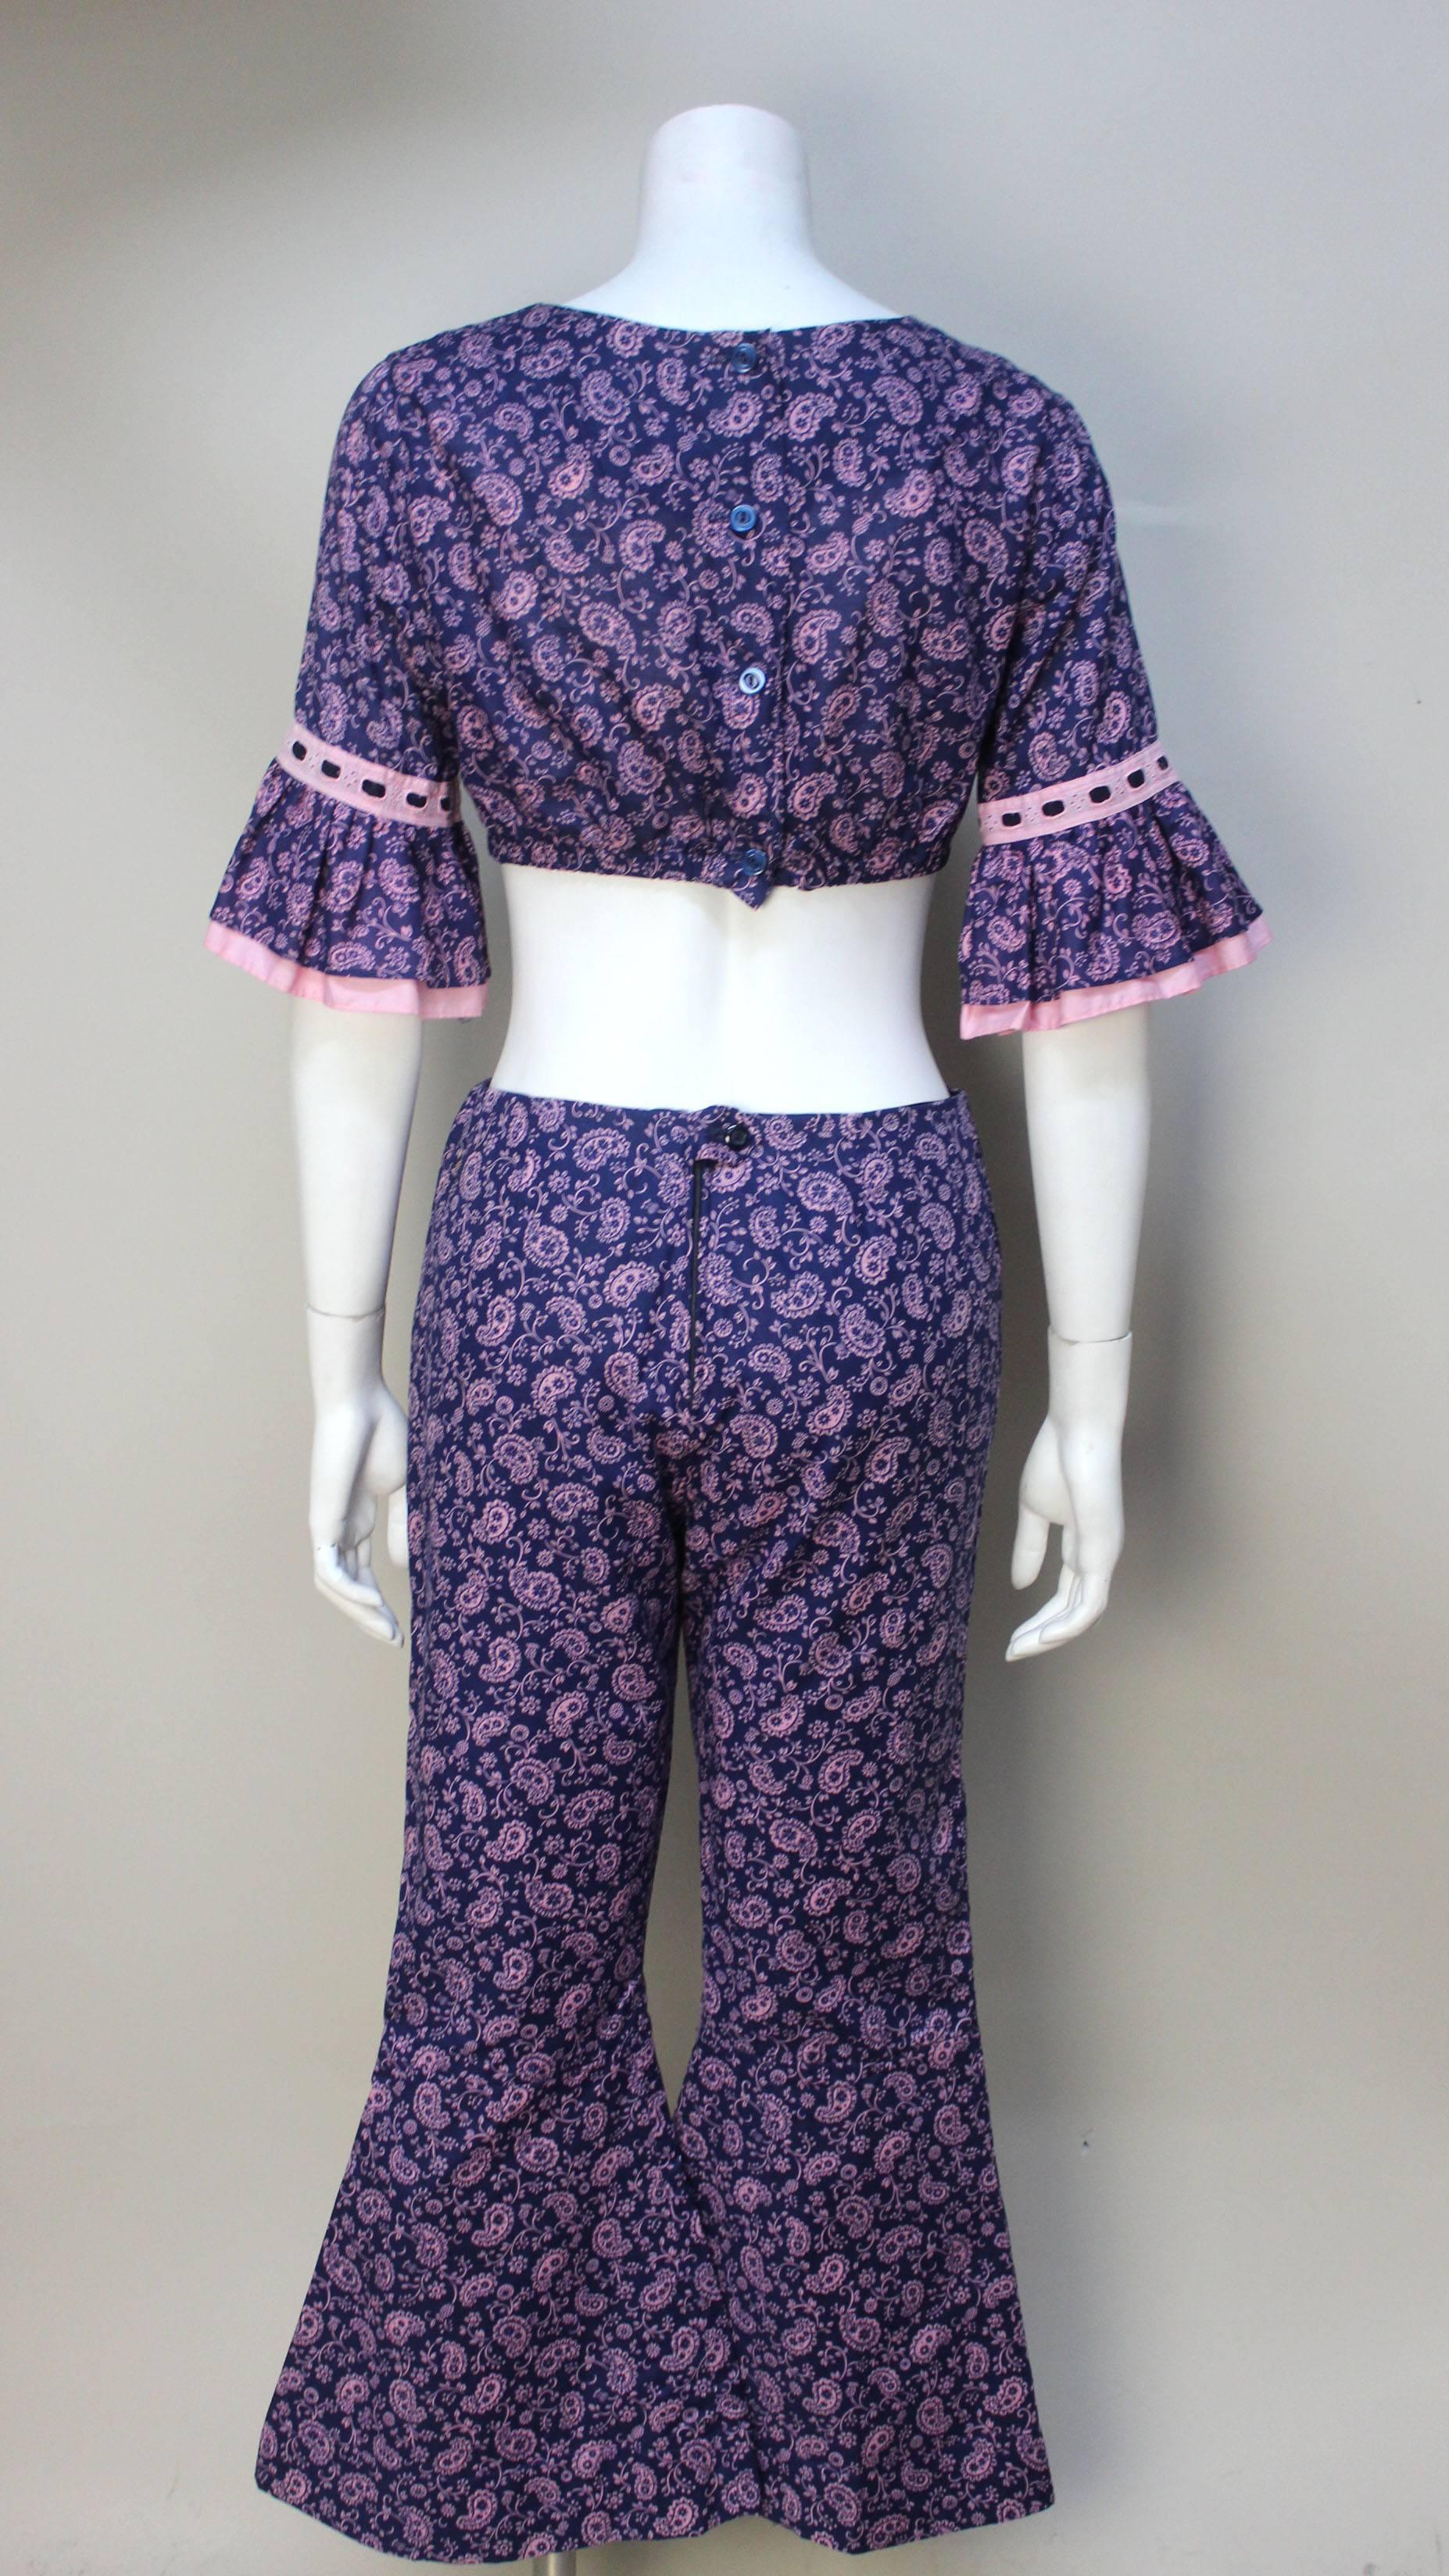 Bobbie Brooks was a popular manufacturer of stylish clothing for teenage girls and young women. The company was very successful at staying in step with fashion trends for juniors. This 2 piece is a great example of that. The combination of a cropped